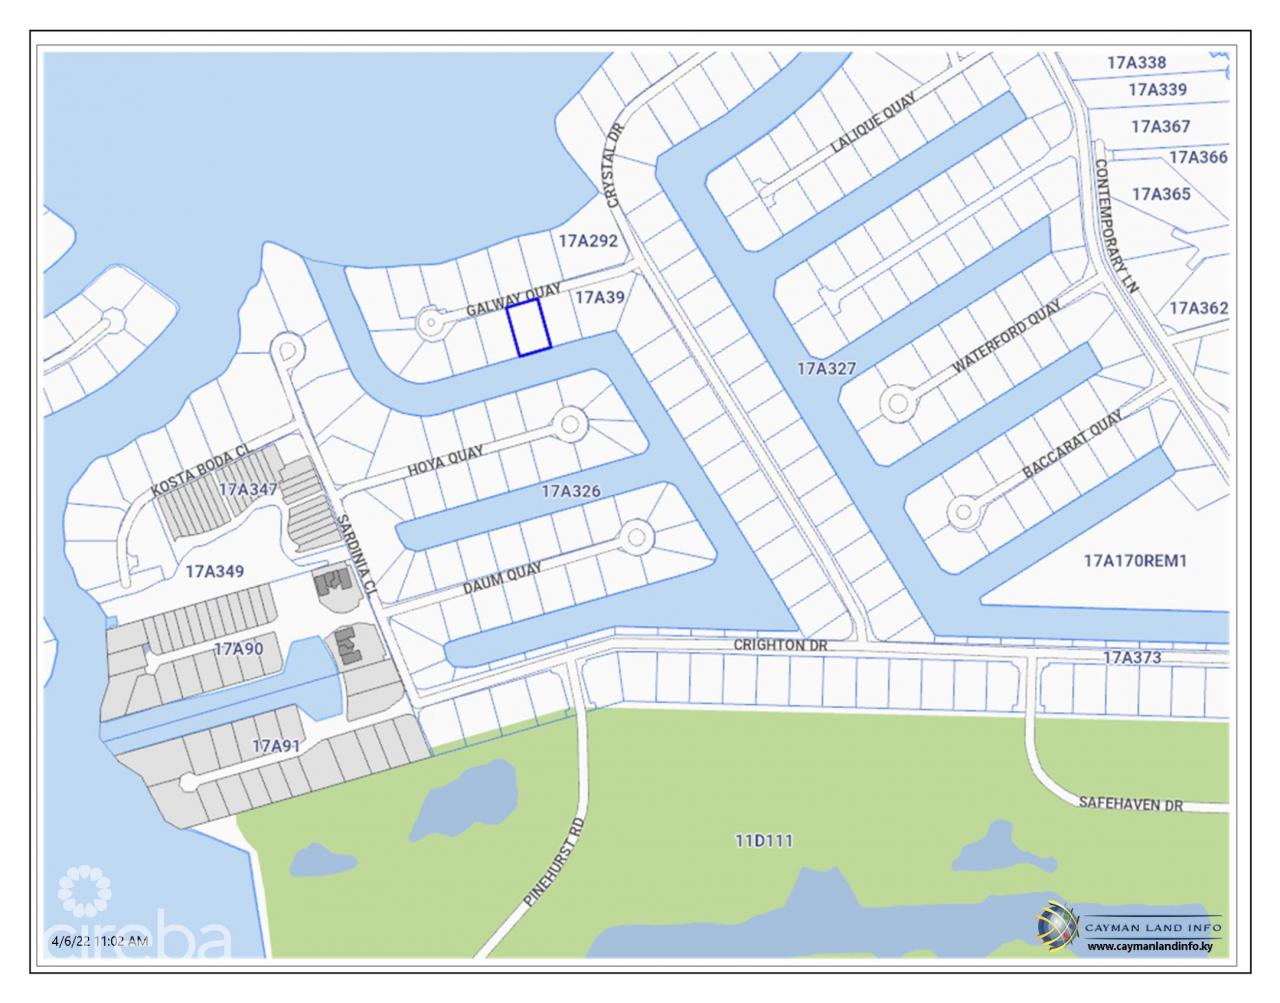 GALWAY QUAY, CRYSTAL HARBOUR LOT - 0.3493 ACRES